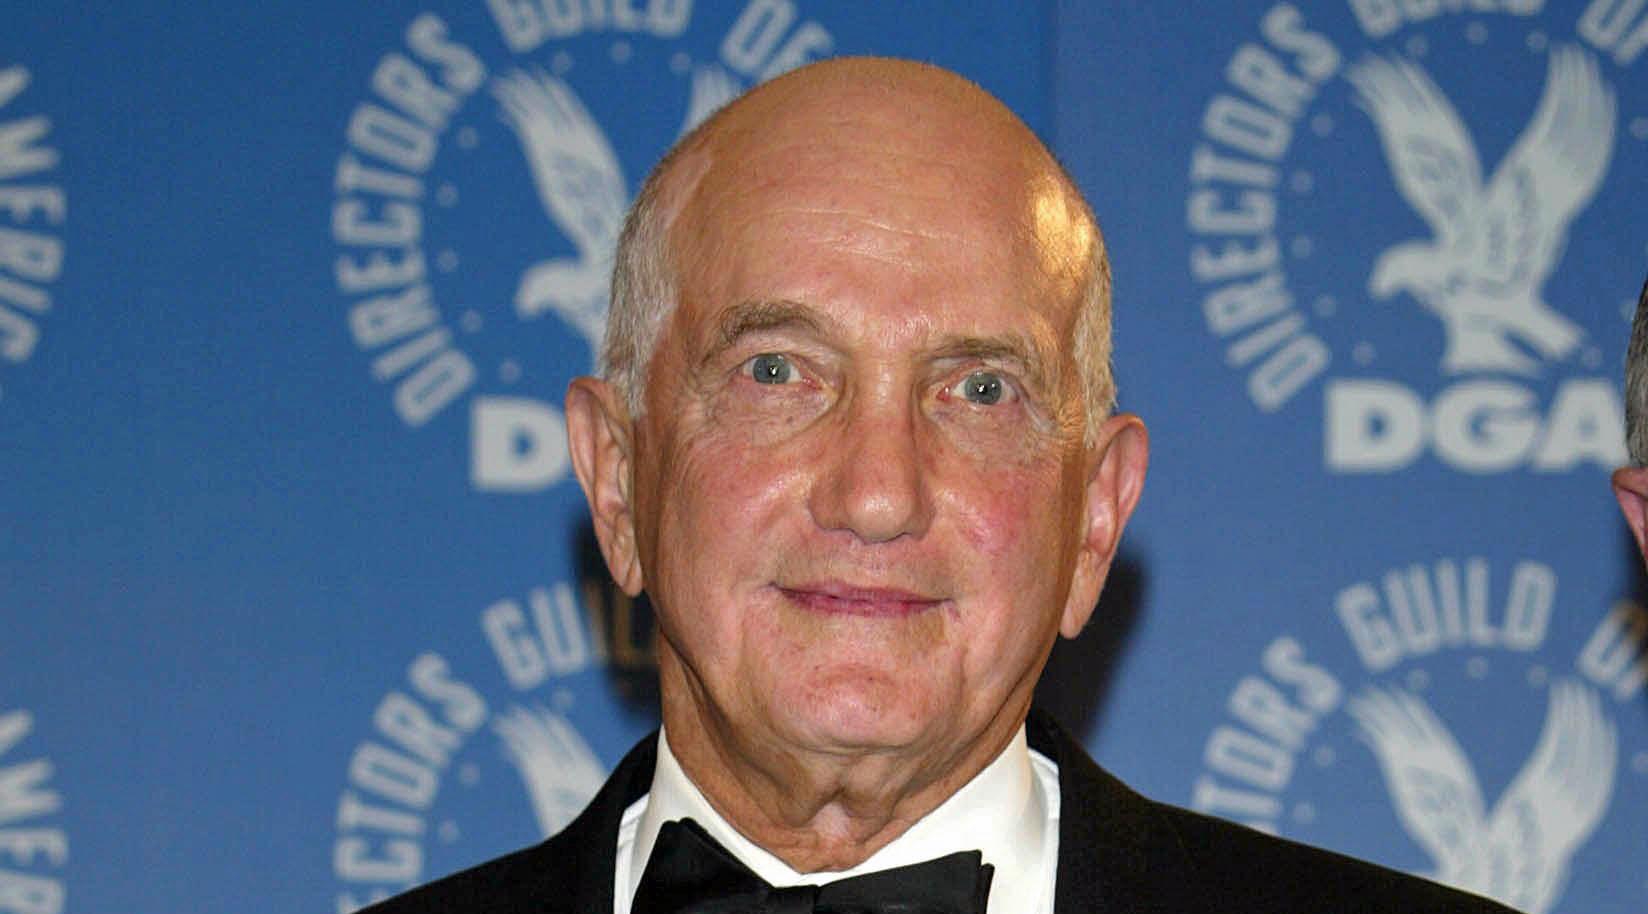        Law & Order      '  Director, DGA Official Ed Sherin Dies at 87